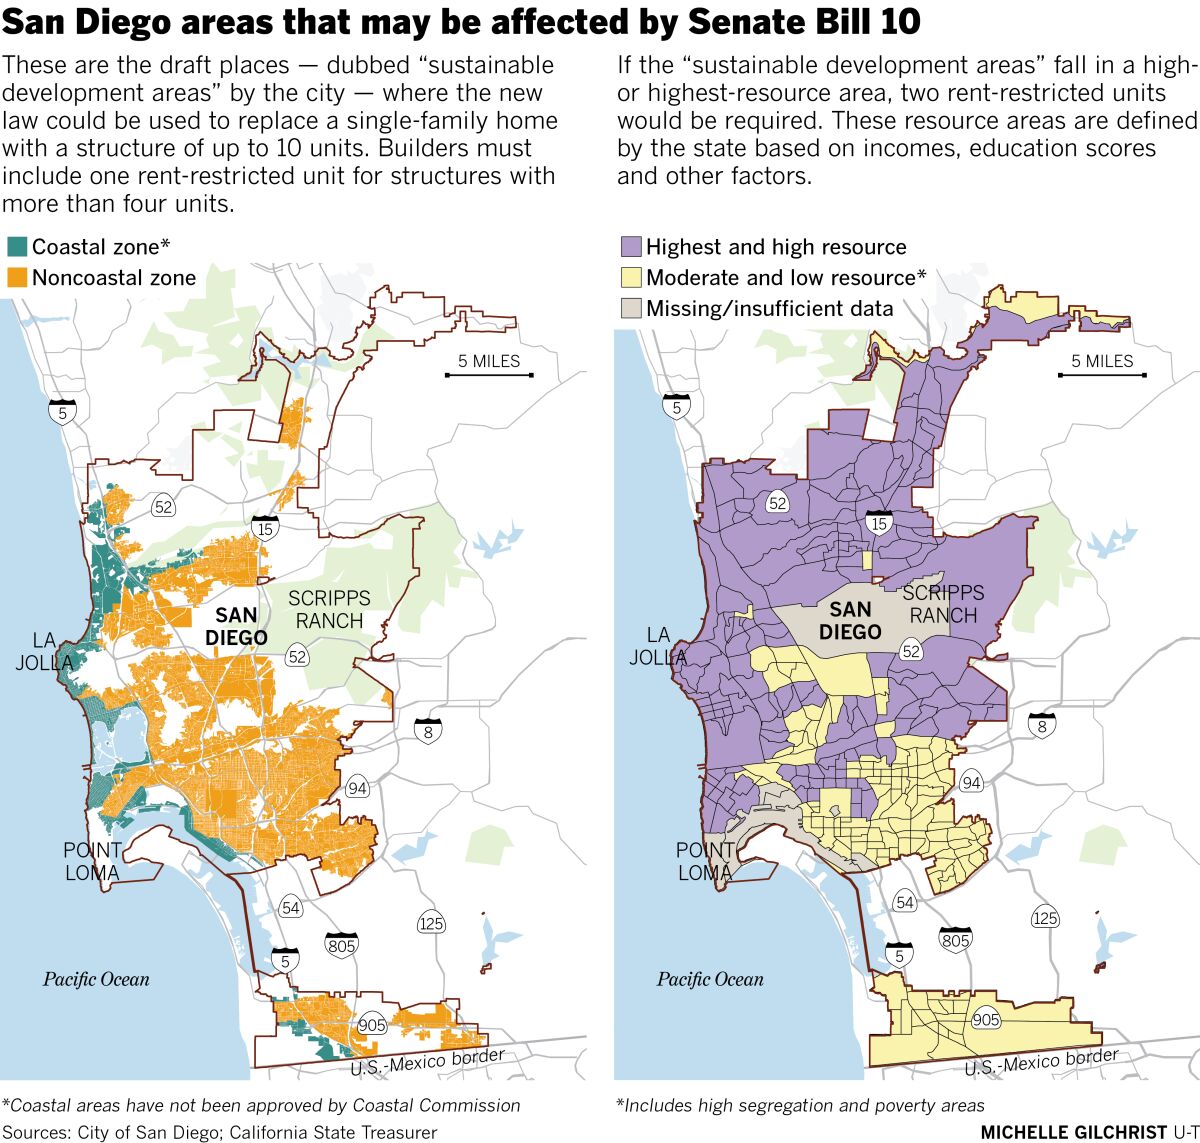 Live in these San Diego areas? You might be affected by the new housing law: SB10